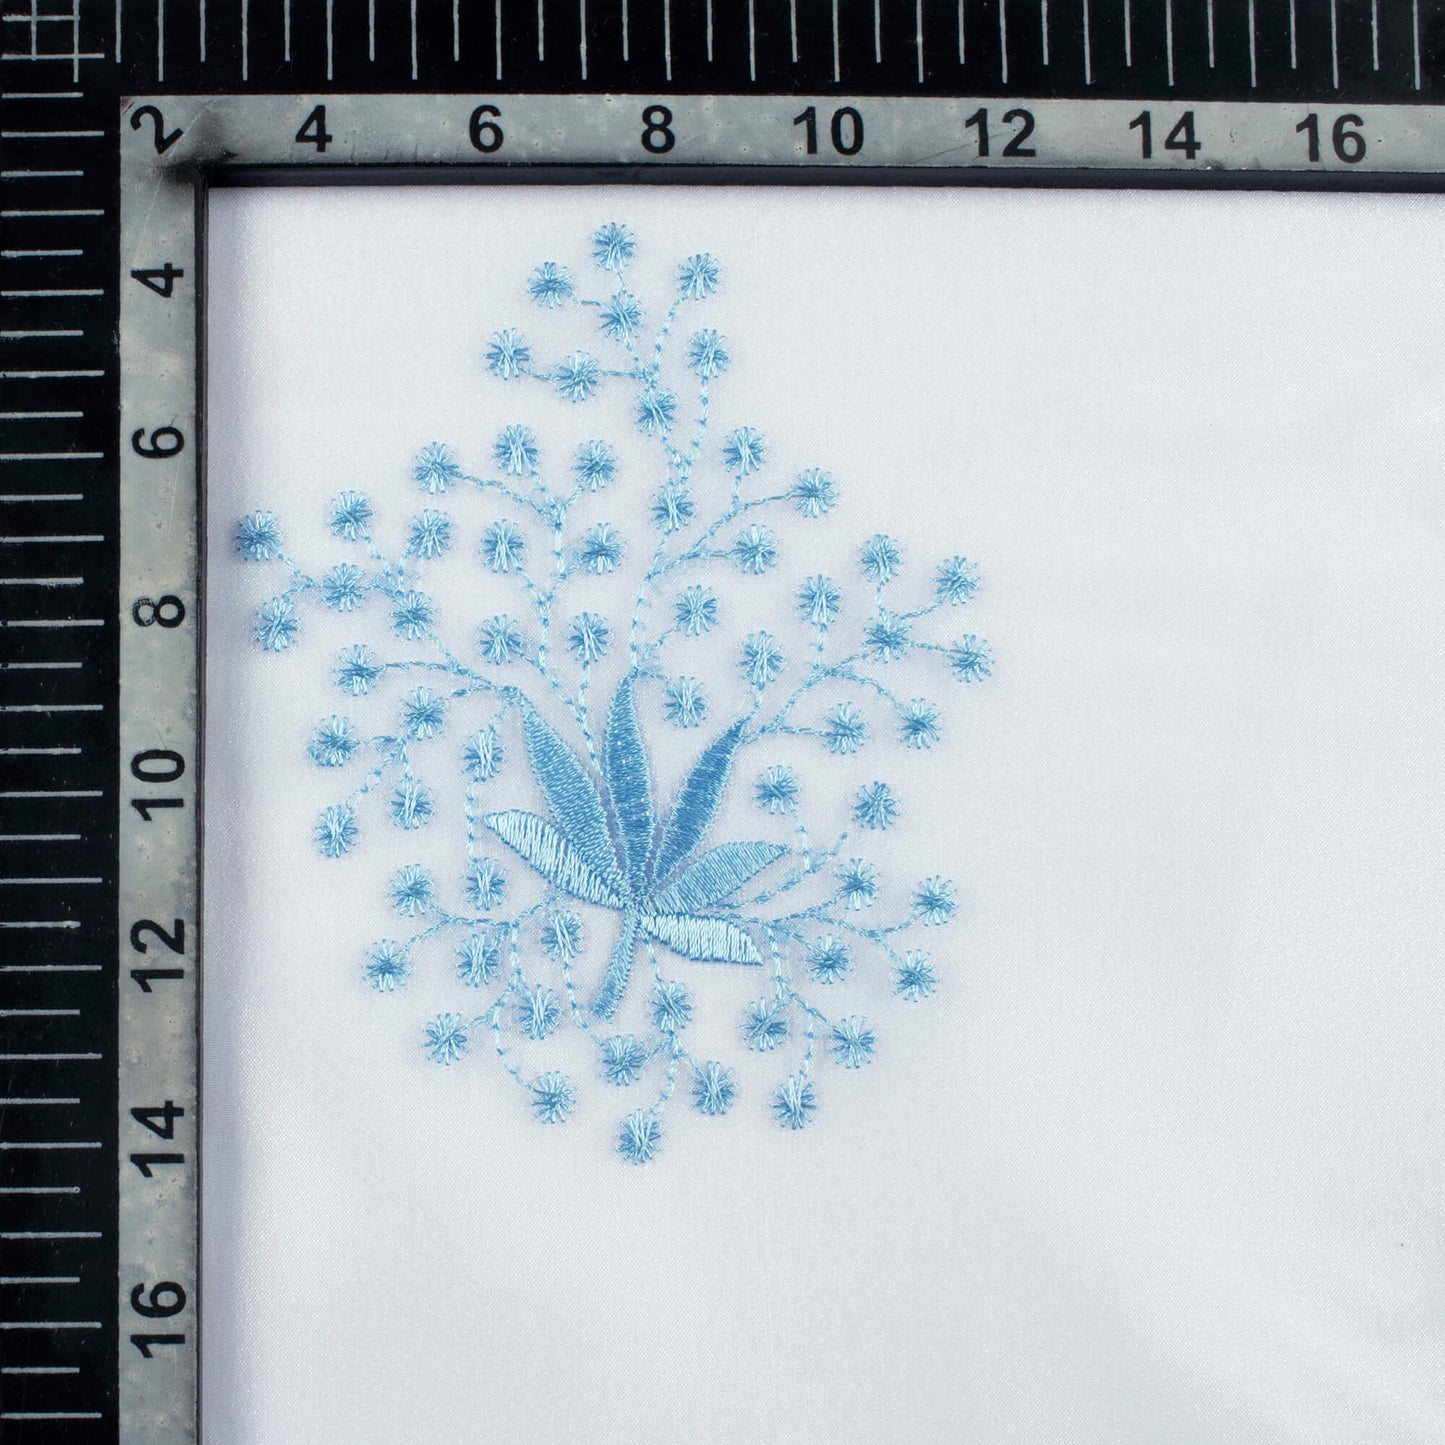 White And Royal Blue Floral Pattern Embroidery Organza Tissue Premium Sheer Fabric (Width 48 Inches)